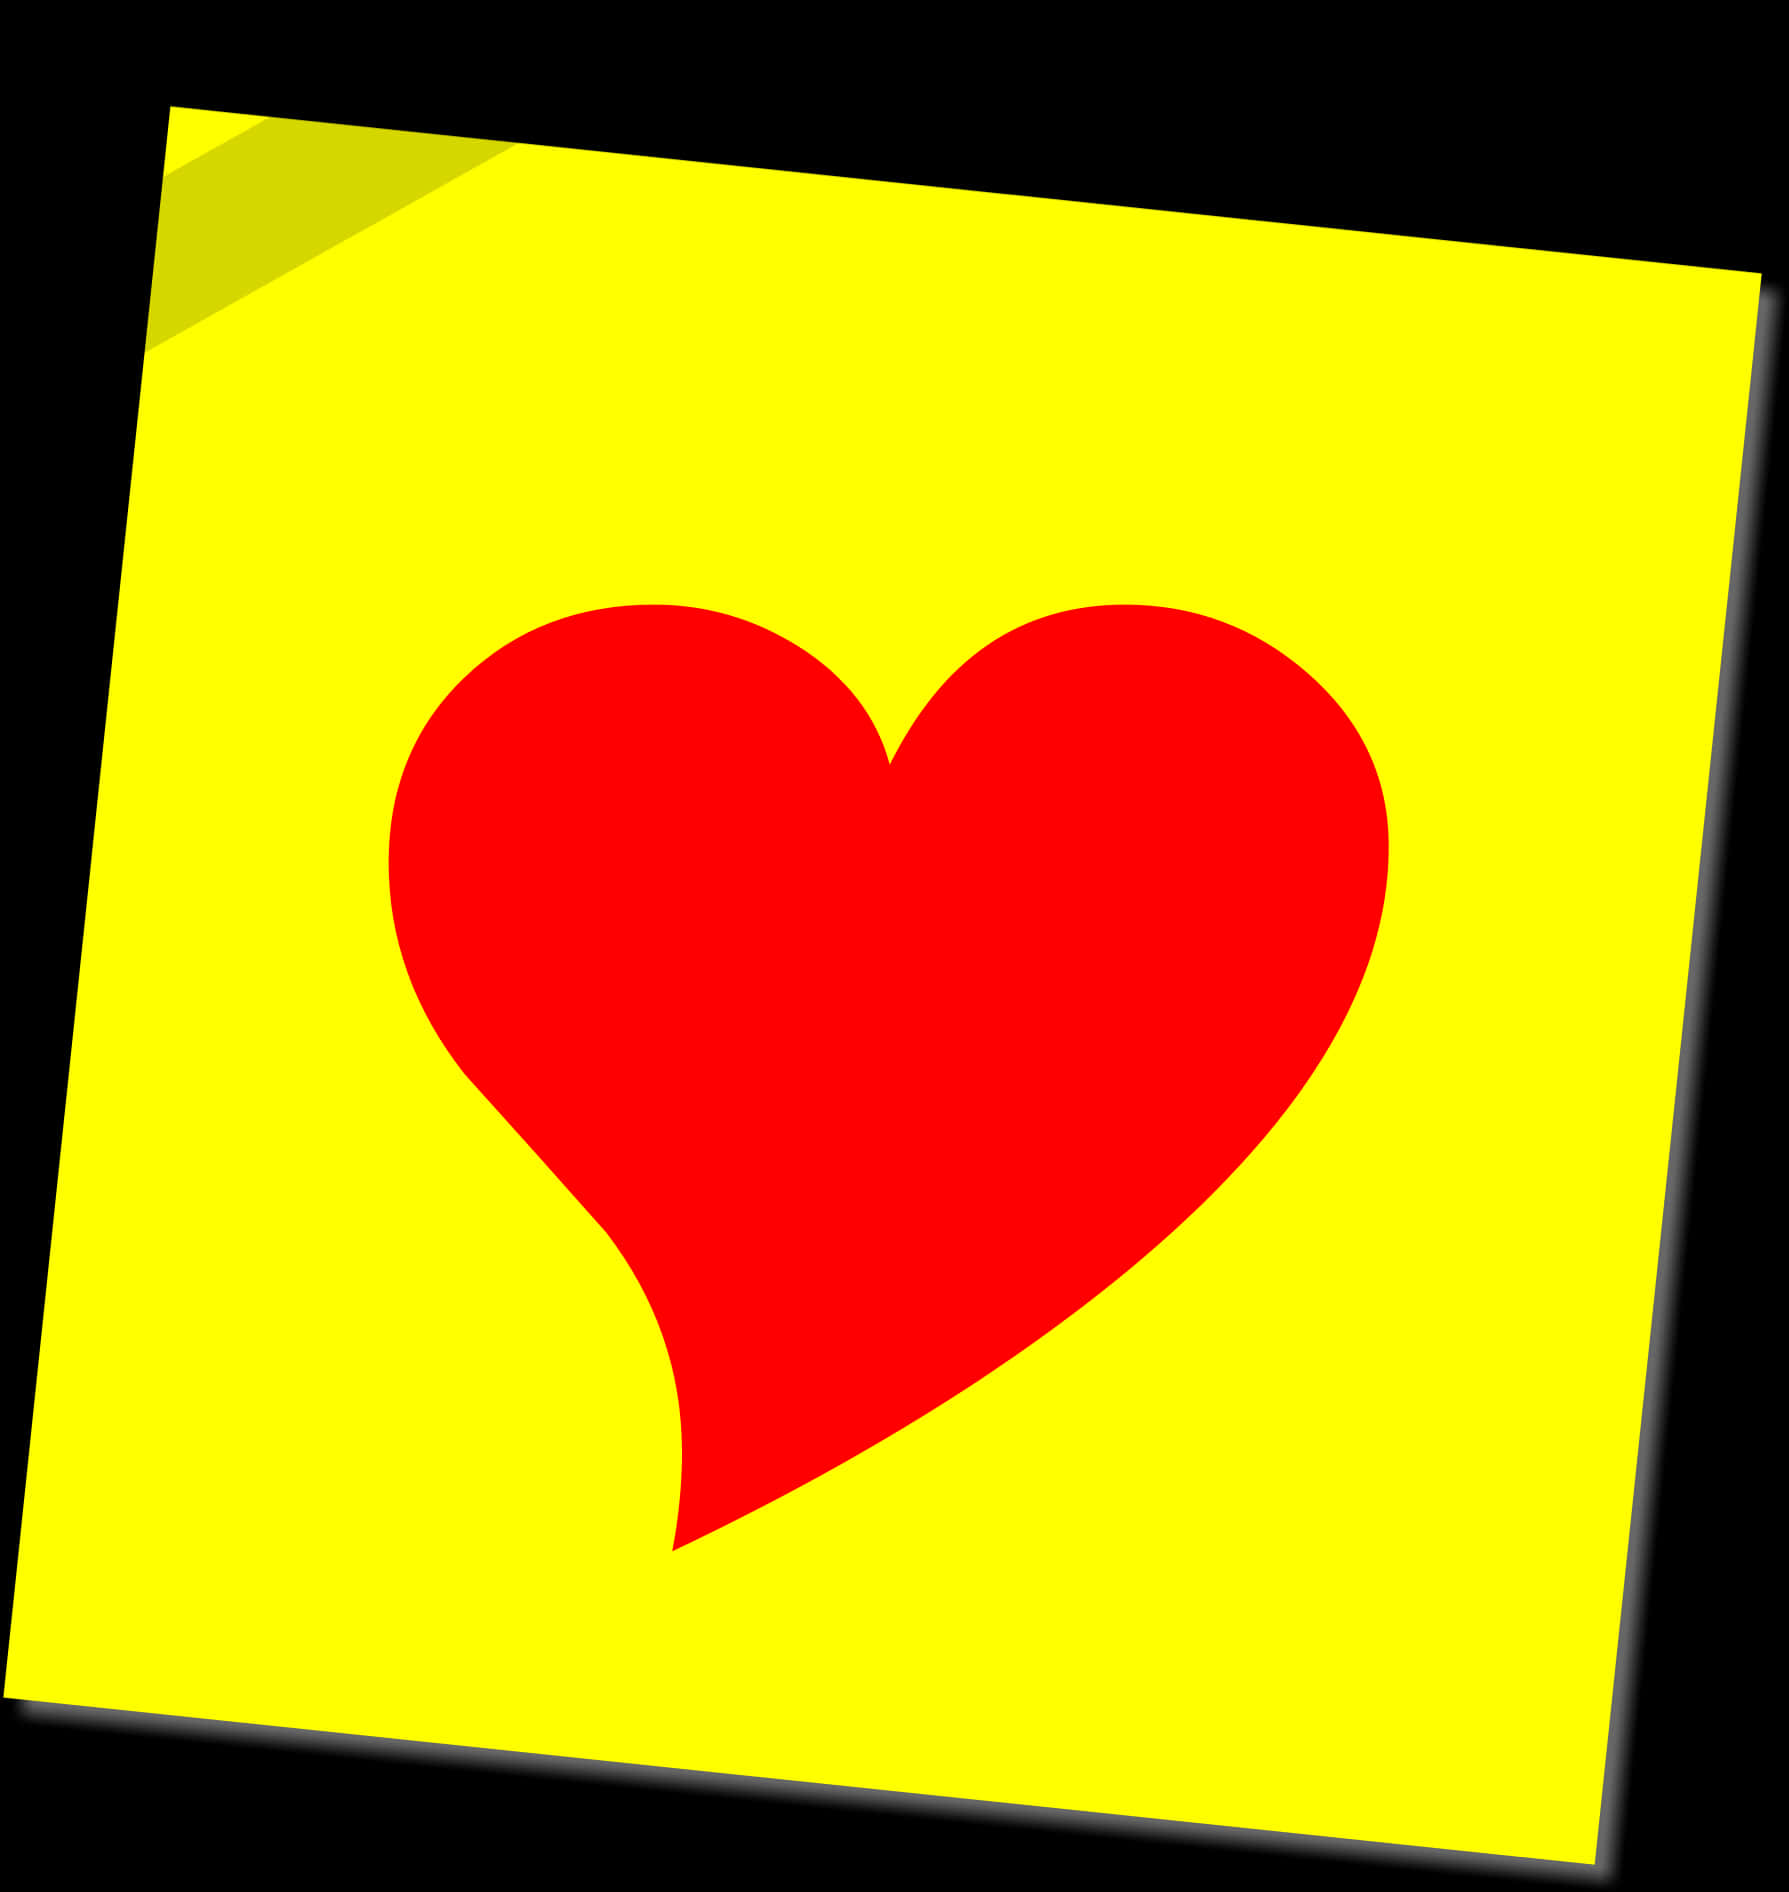 Love Note Sticky Heart Graphic PNG image